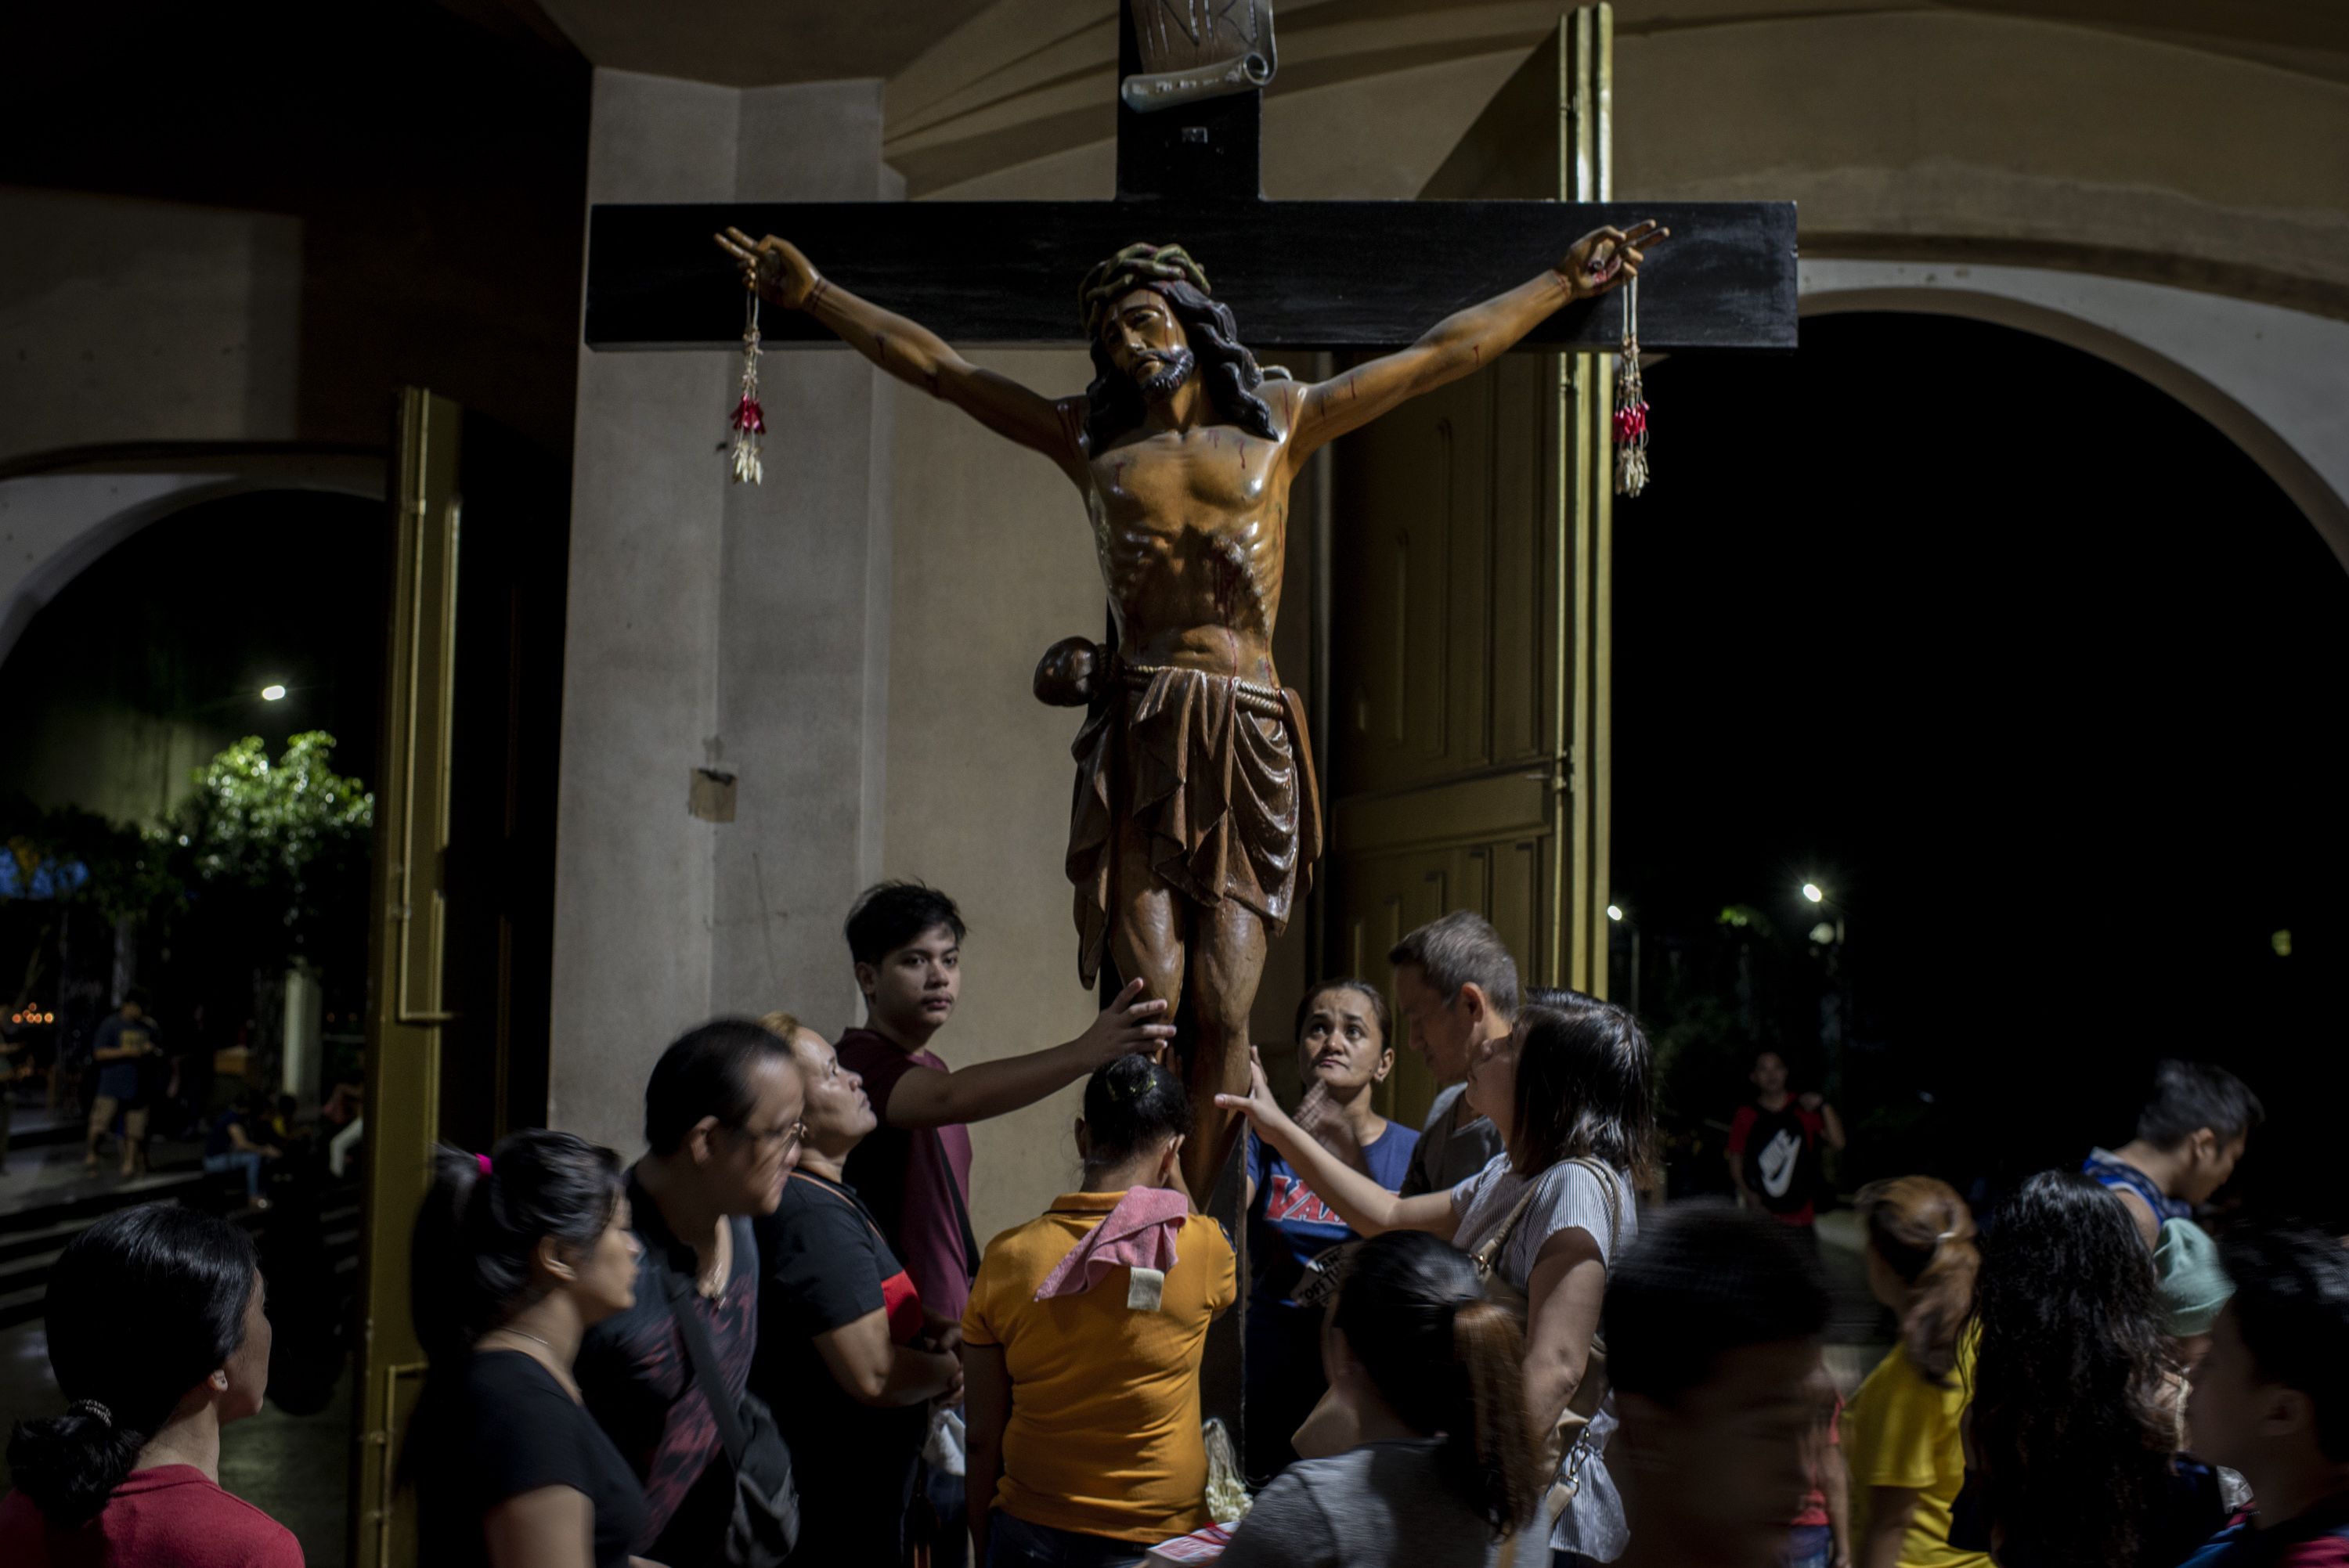 Parishioners touch the crucifix after an evening service at Baclaran Church in Manila. Image by Eloisa Lopez. Philippines, 2018.